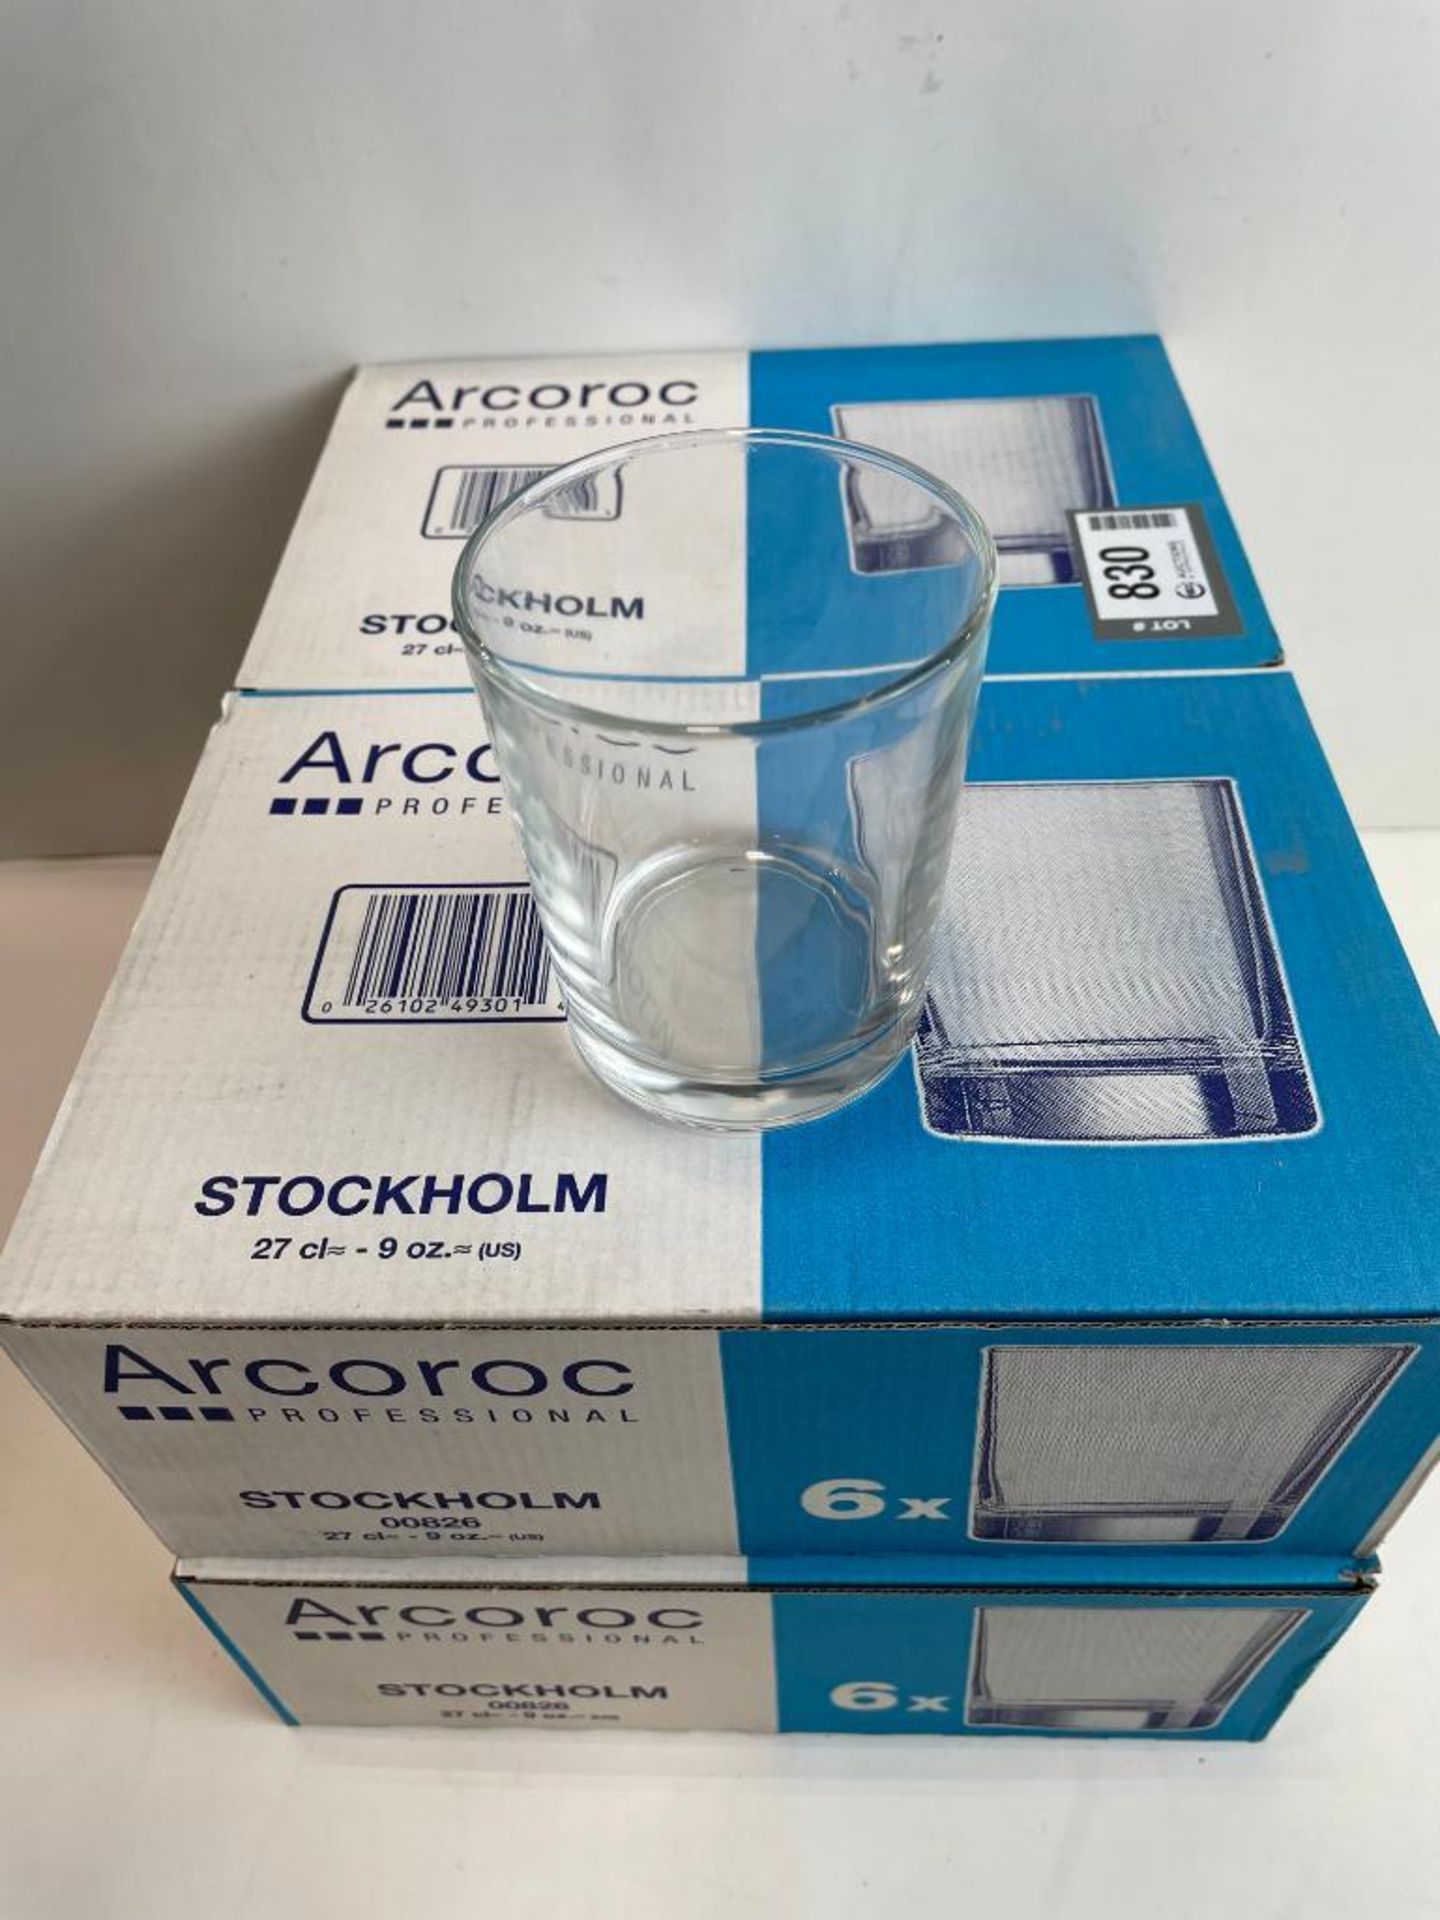 4 BOXES OF 9.5OZ/270ML STOCKHOLM OLD FASHIONED GLASSES - 6 PER BOX, ARCOROC 00826 - NEW - Image 3 of 3